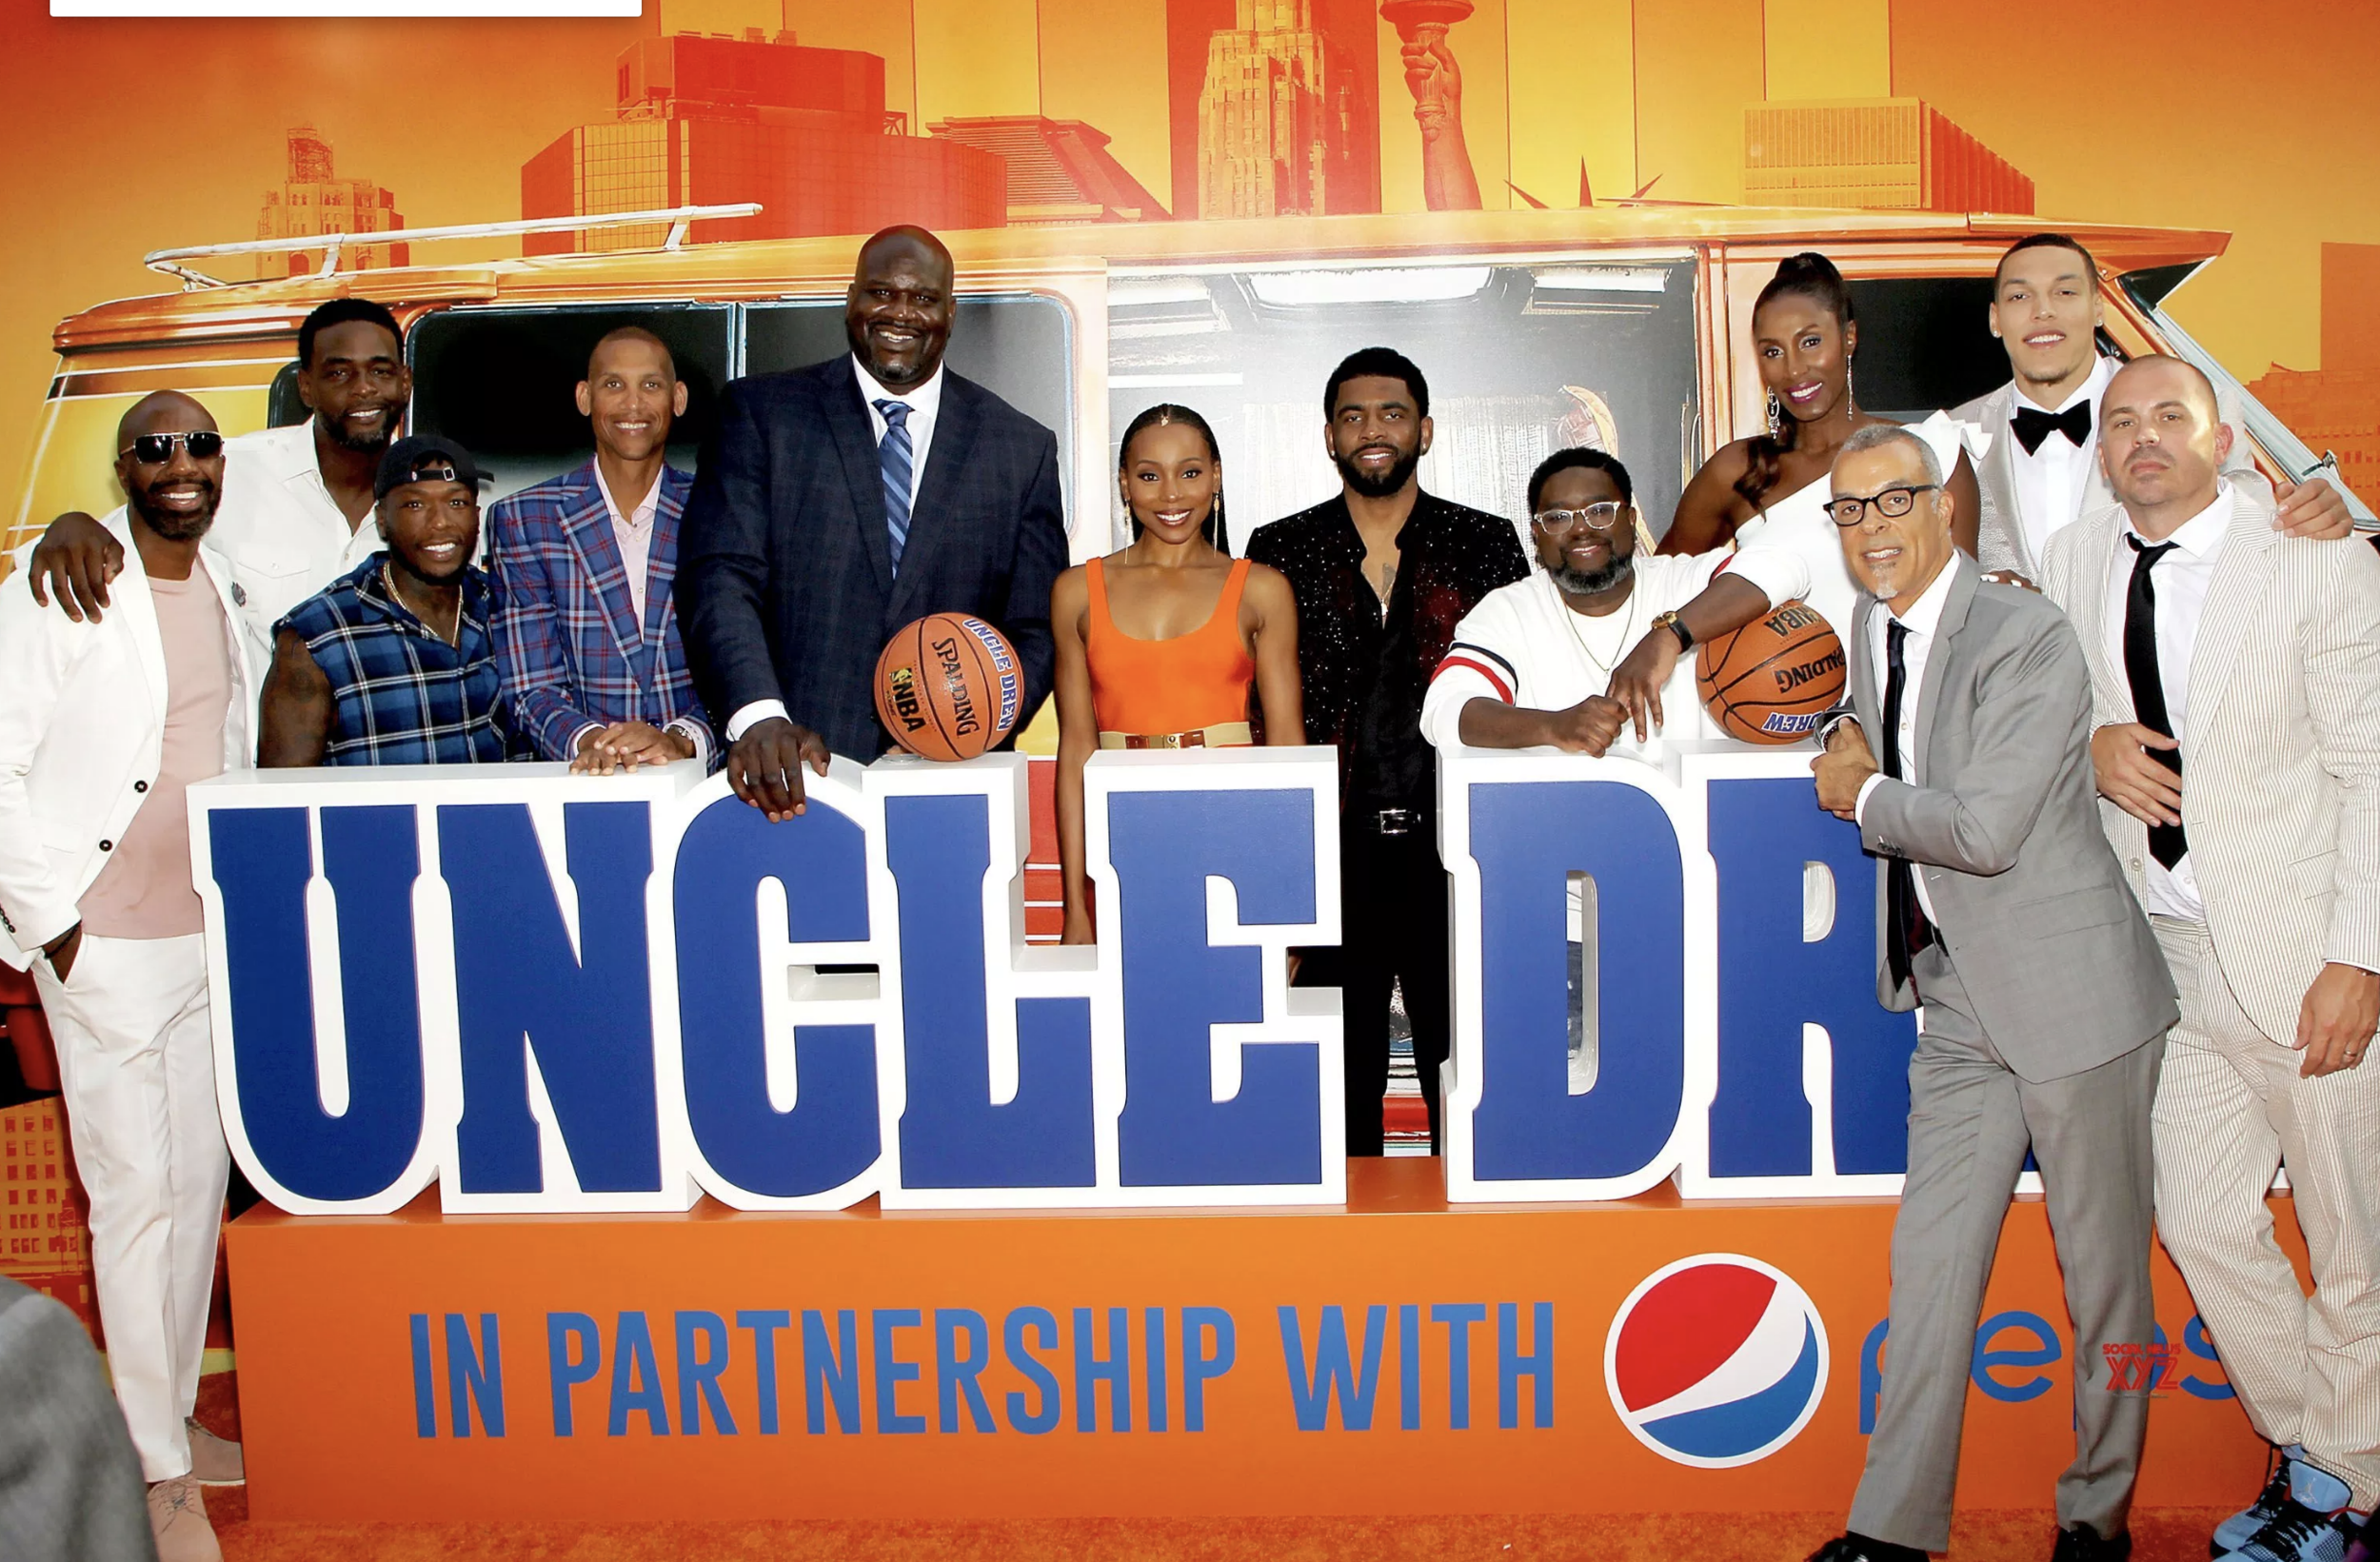 Summer Catch Up Review: 'Uncle Drew' is Inside Basketball But Funny -  Sunshine State Cineplex